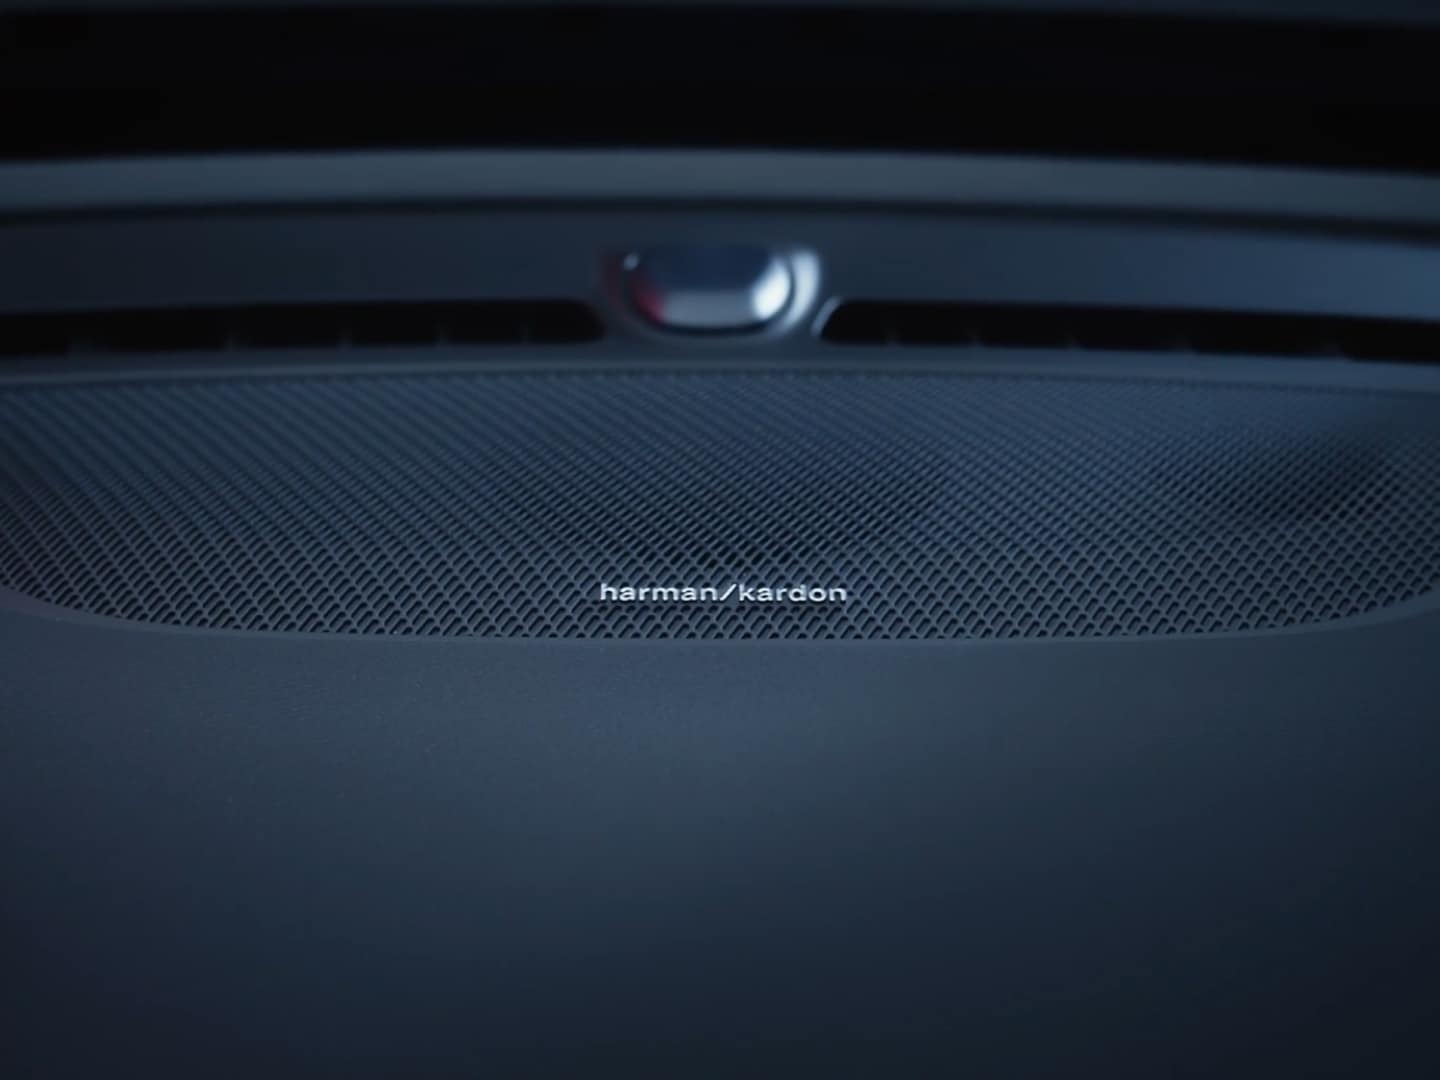 A Harman Kardon speaker, part of the premium sound system available in the Volvo EC40.